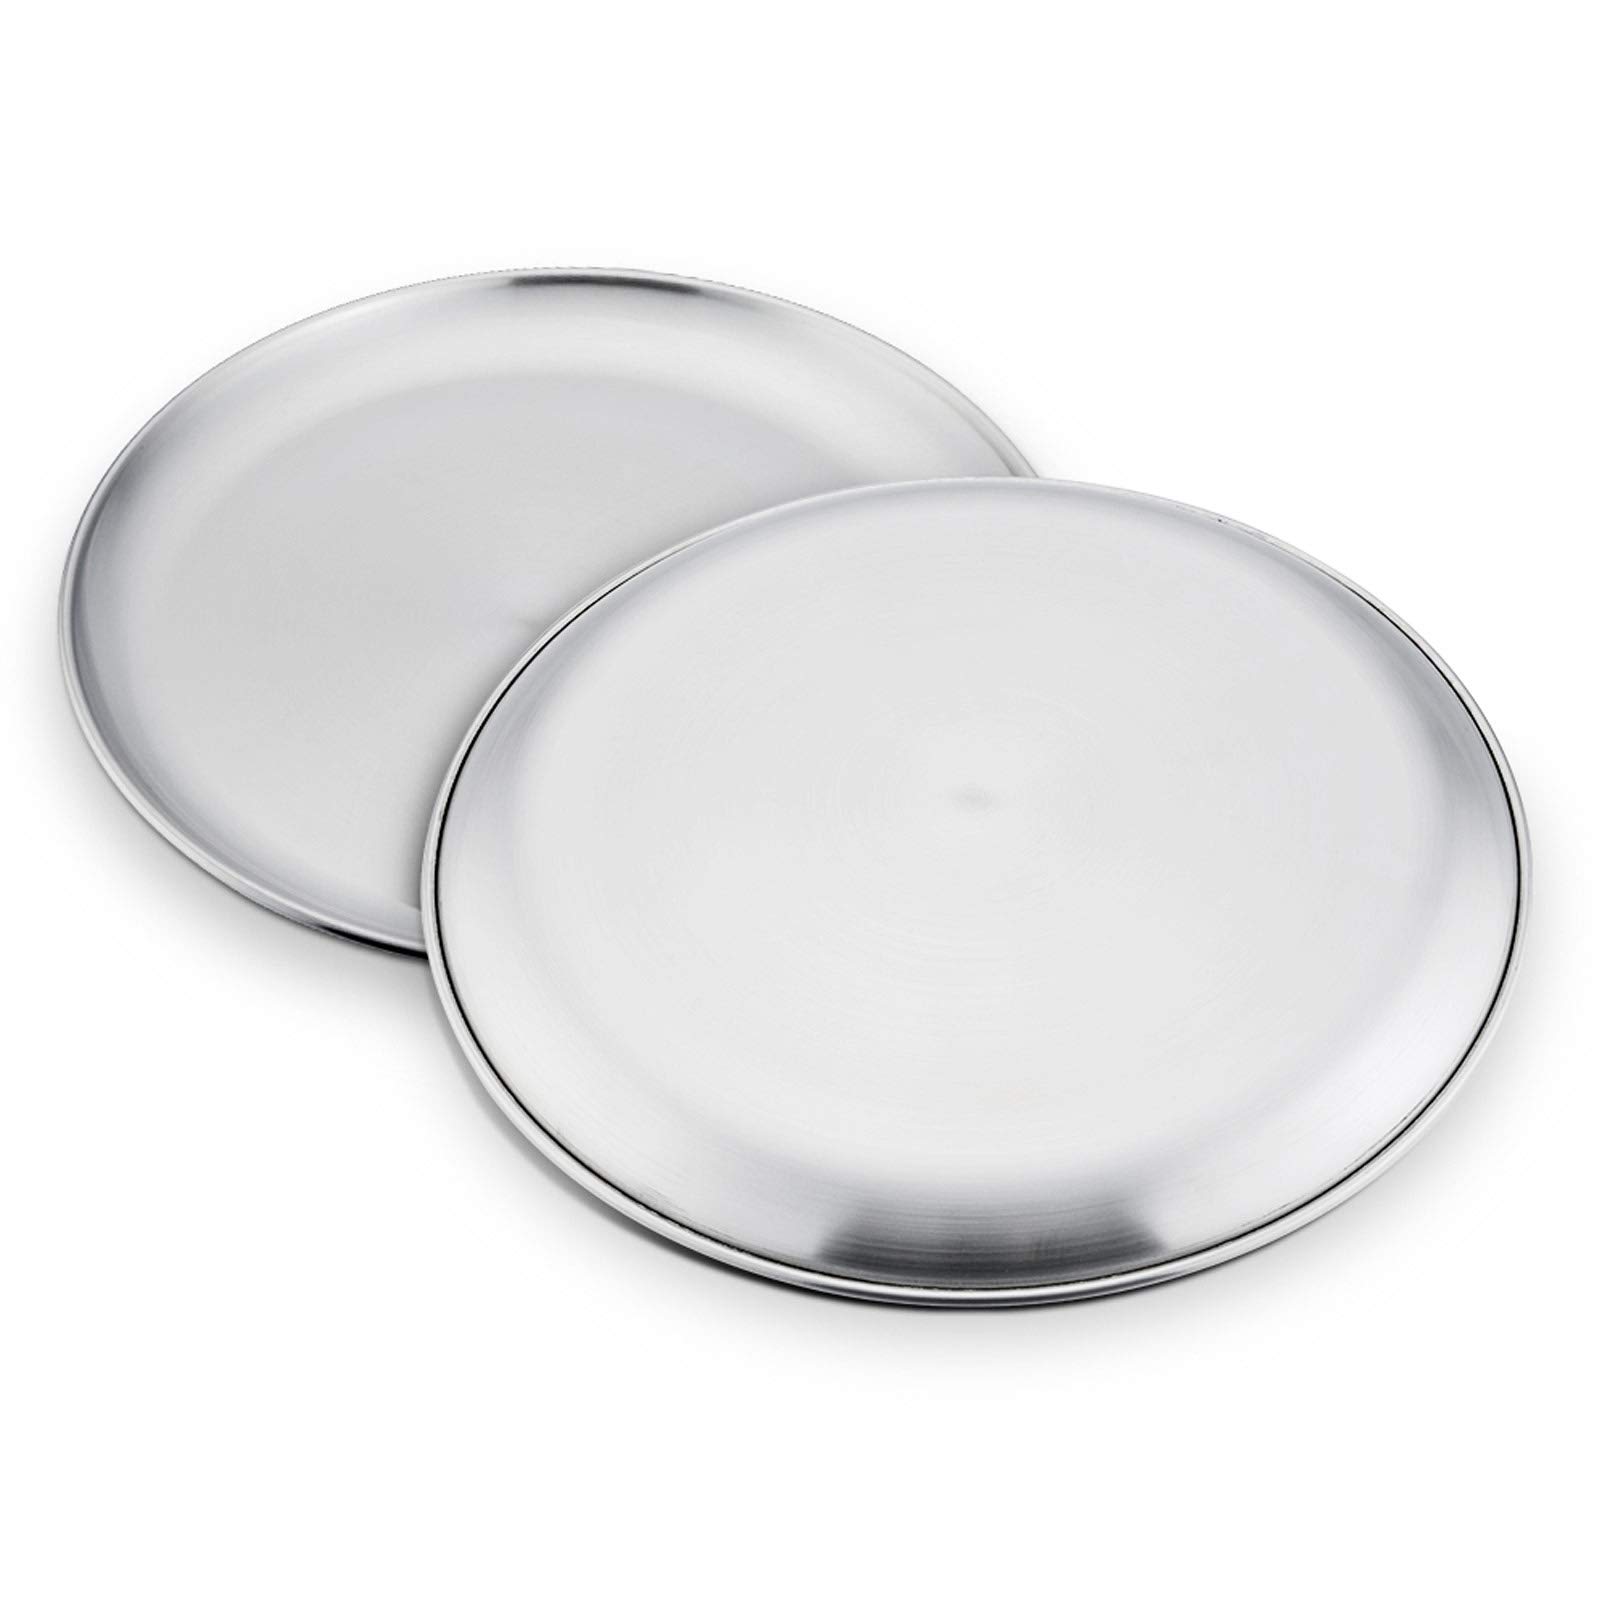 TeamFar Pizza Pan, 10 inch Pizza Pans Pizza Tray Stainless Steel for Oven Baking, Non Toxic & Healthy, Heavy Duty & Dishwasher Safe - Set of 2